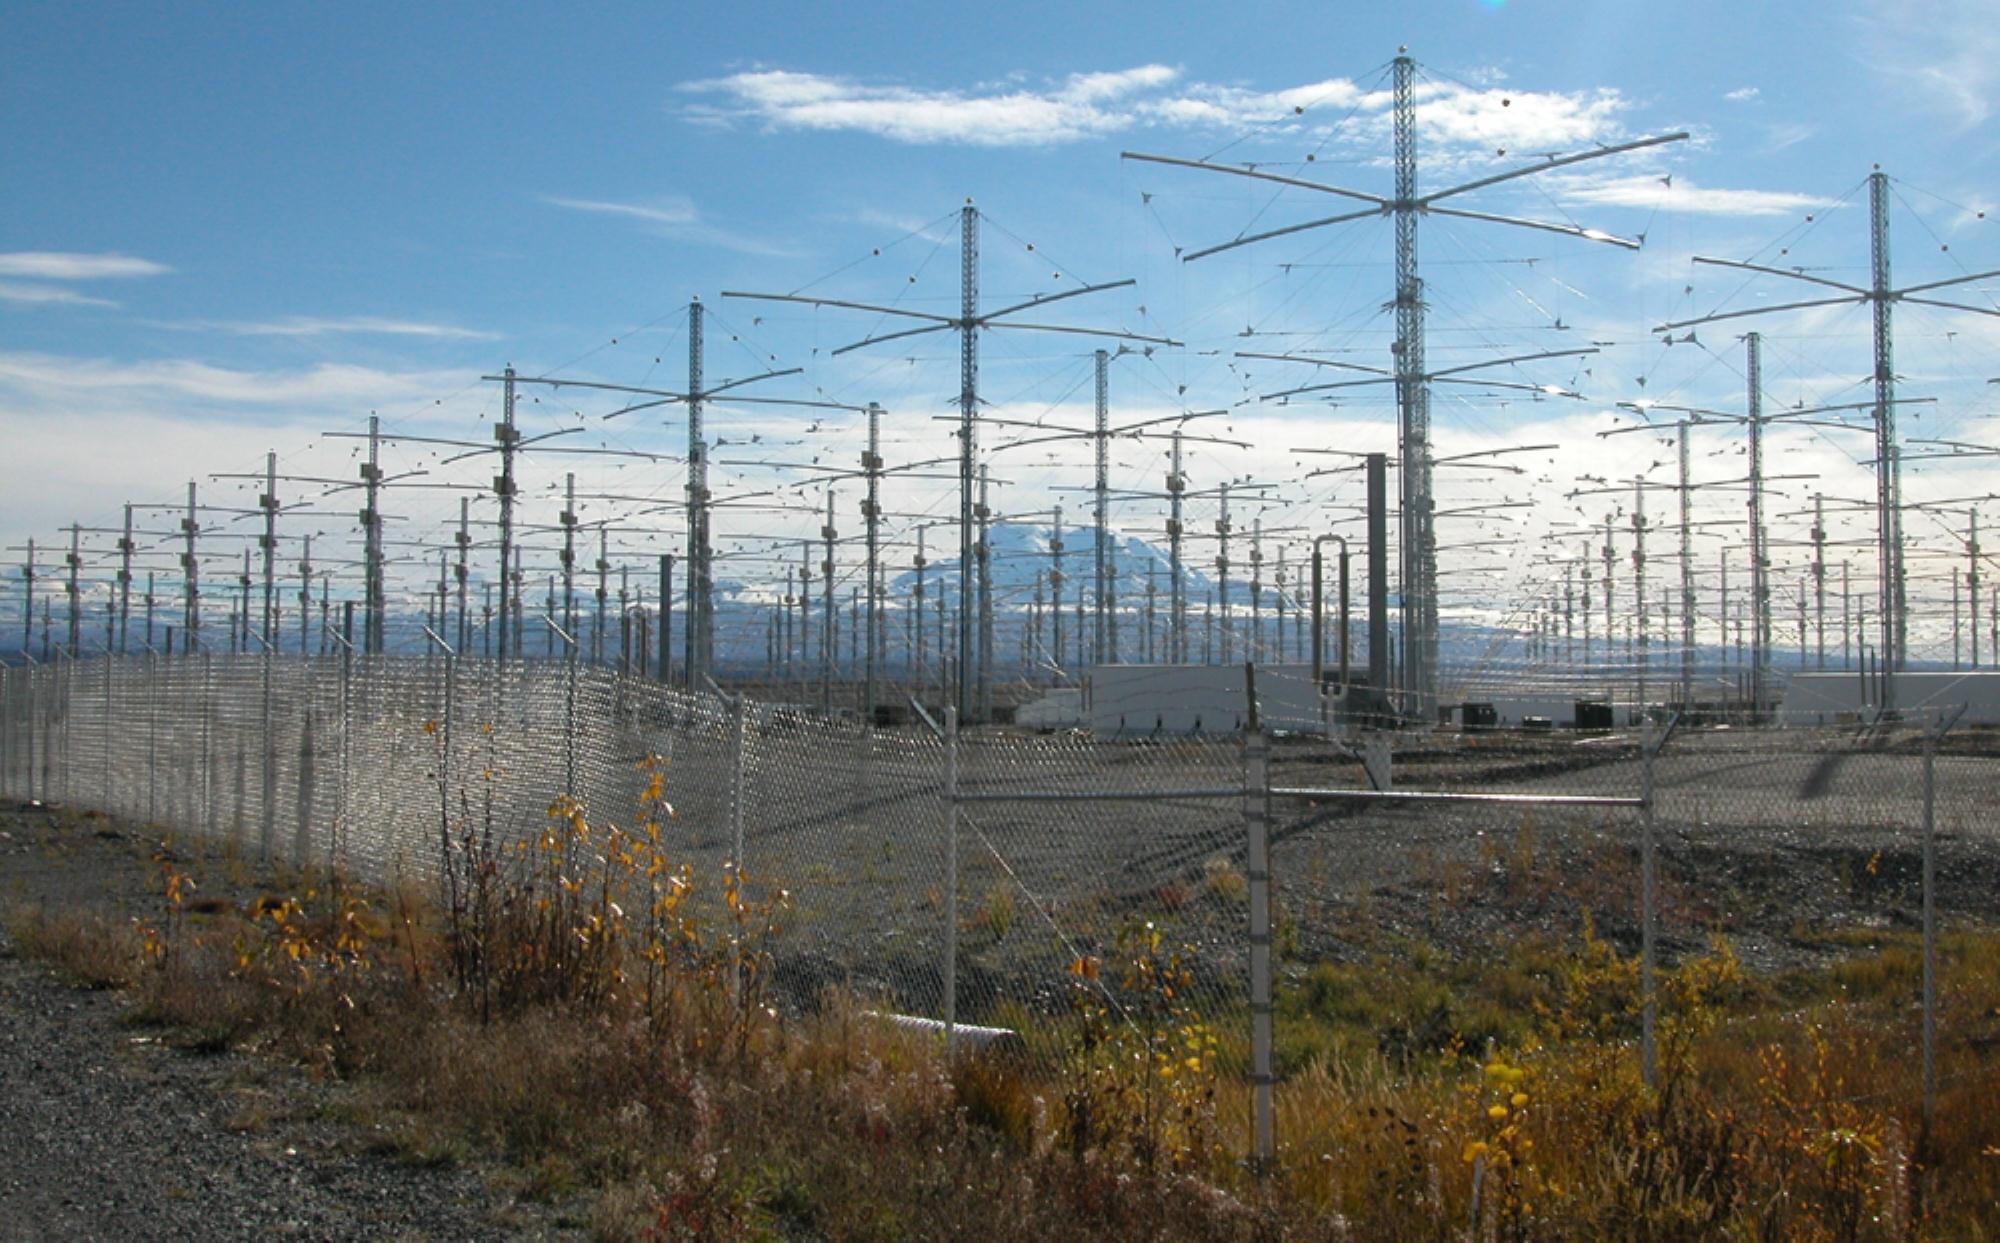 The High Frequency Active Auroral Research Program (HAARP)